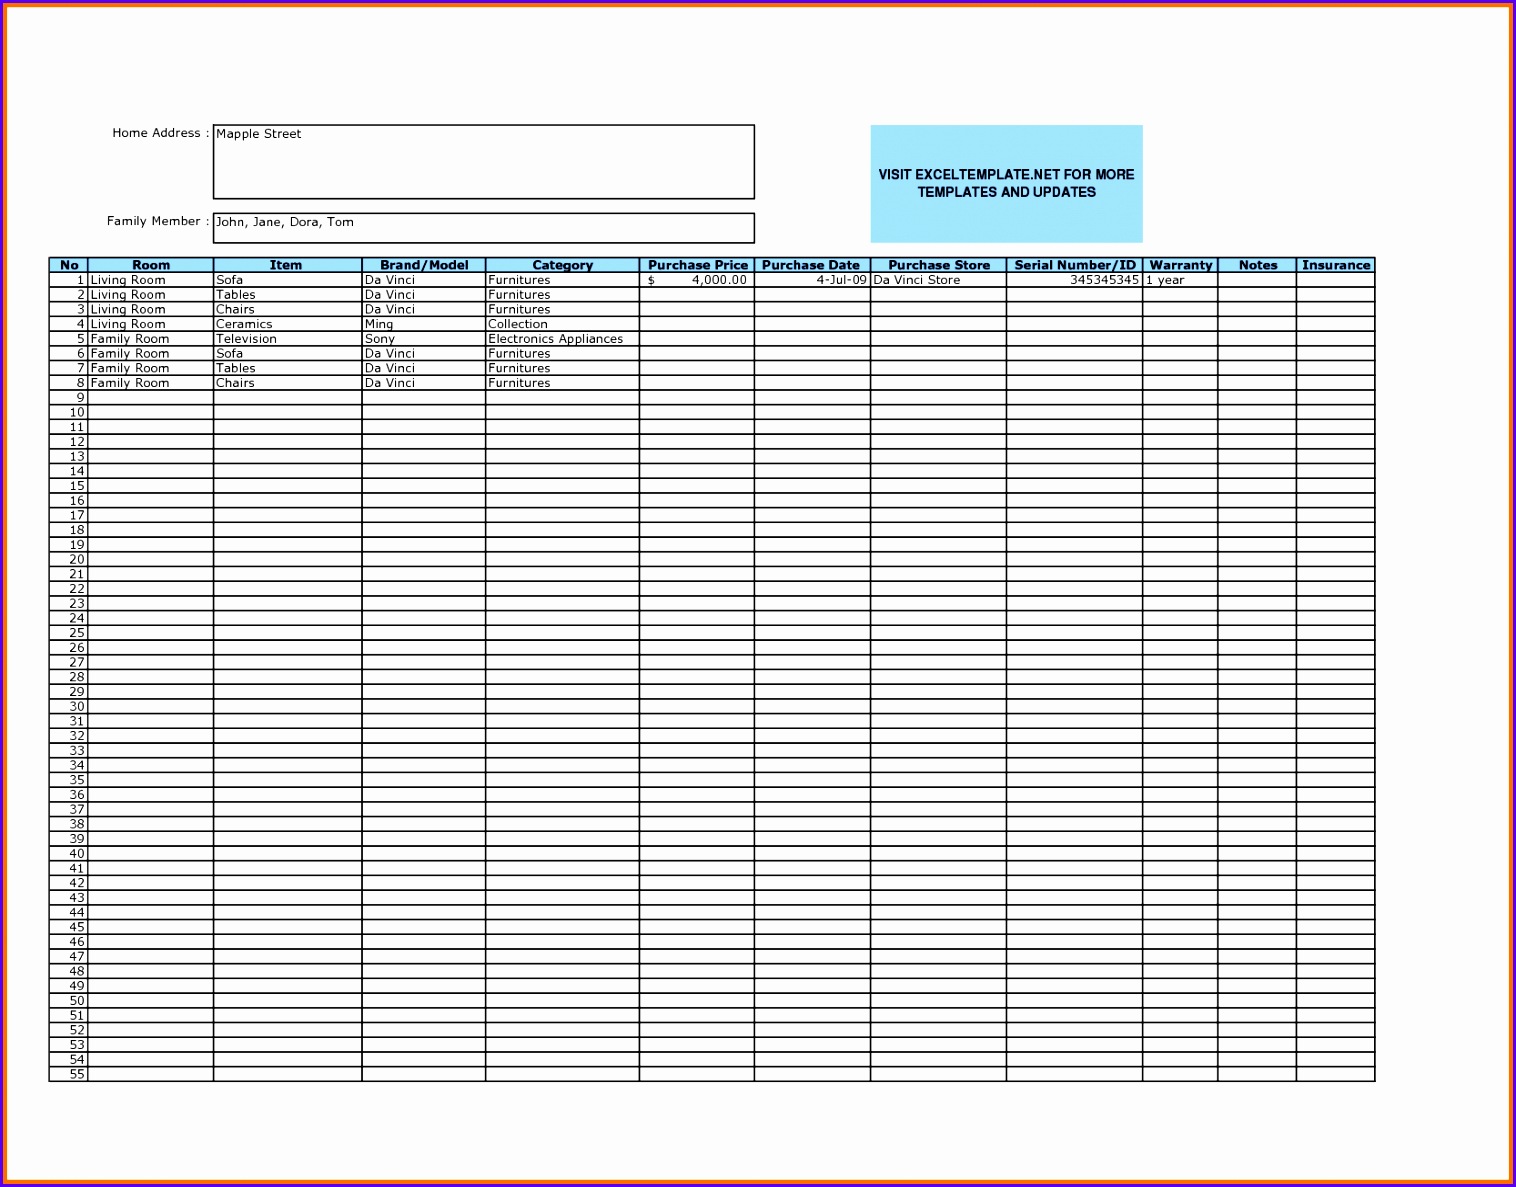 Home Inventory Excel Template by varrie29 15161187